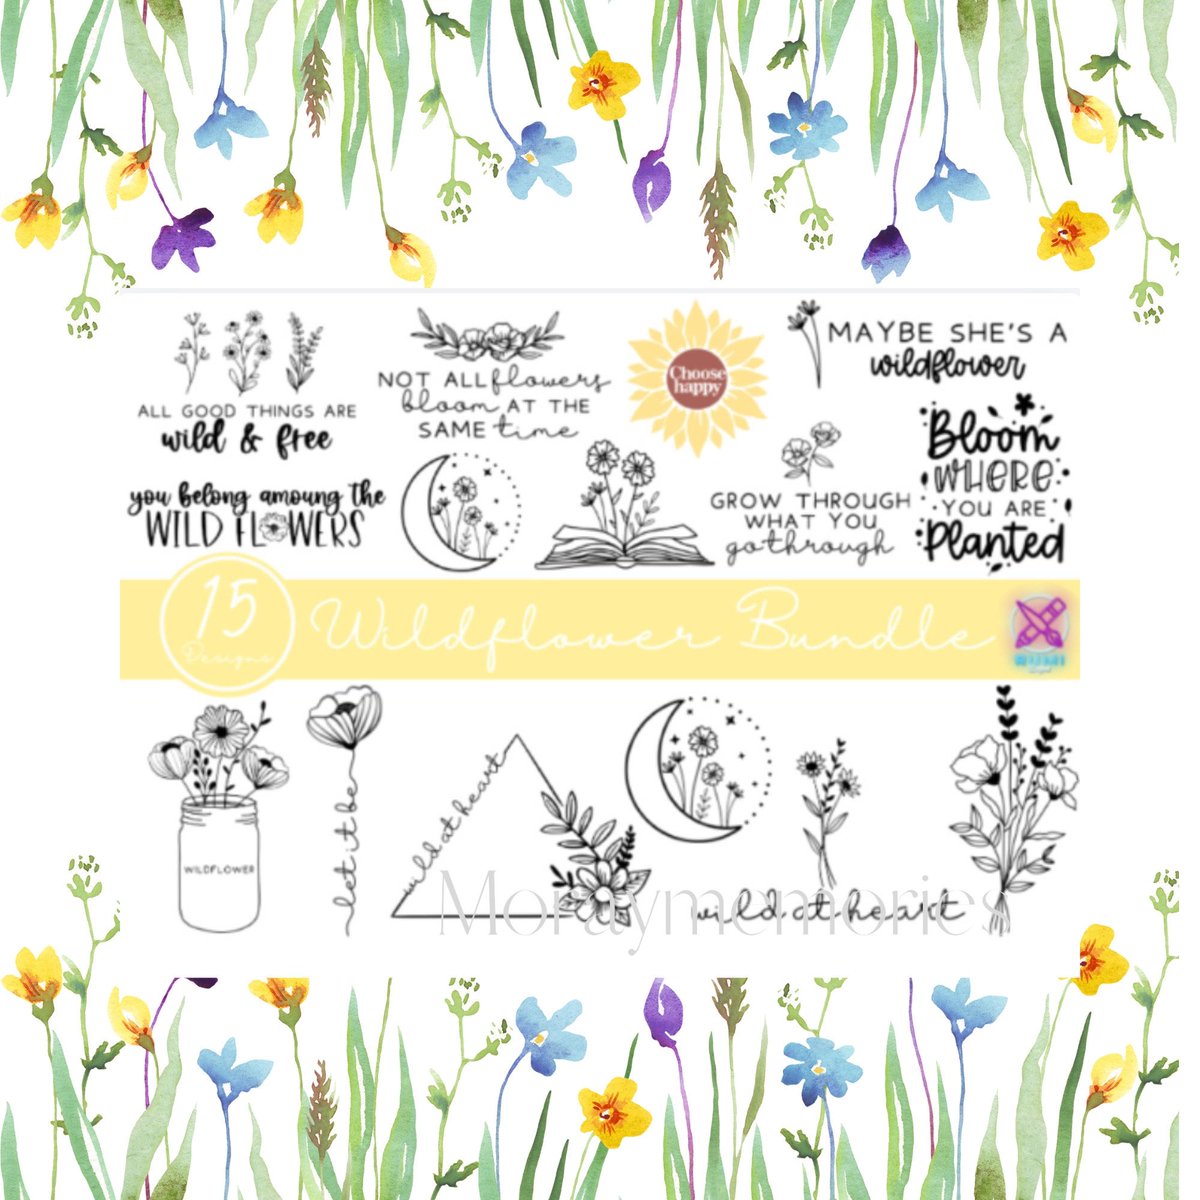 Excited to share this item from my #etsy shop: Sunflower and Wildflower SVG Bundle, flower svg, wildflower svg, bouquetsvgbundle etsy.me/3Xg0nHW

#flowerssvg
#flowersvg
#handdrawnclipart
#bouquetsvgbundle
#wildflowersvg
#bouquetclipart
#floralclipart
#floralsvg